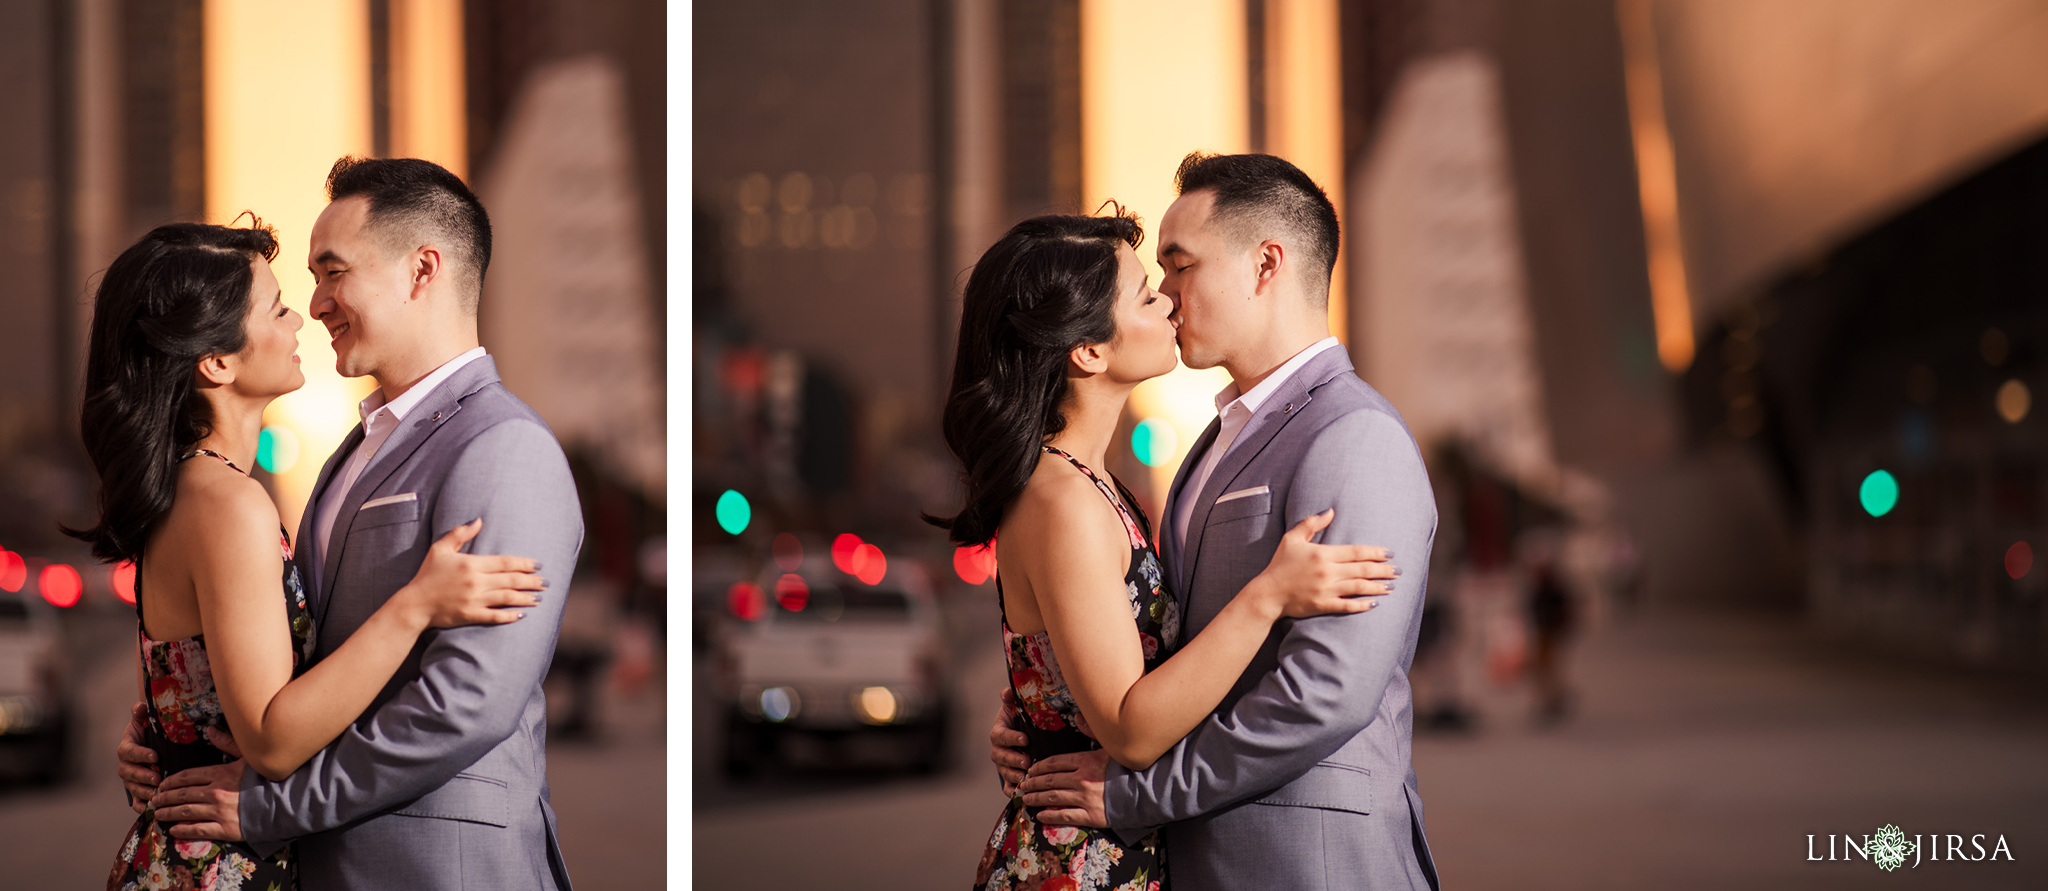 15 downtown los angeles engagement photography